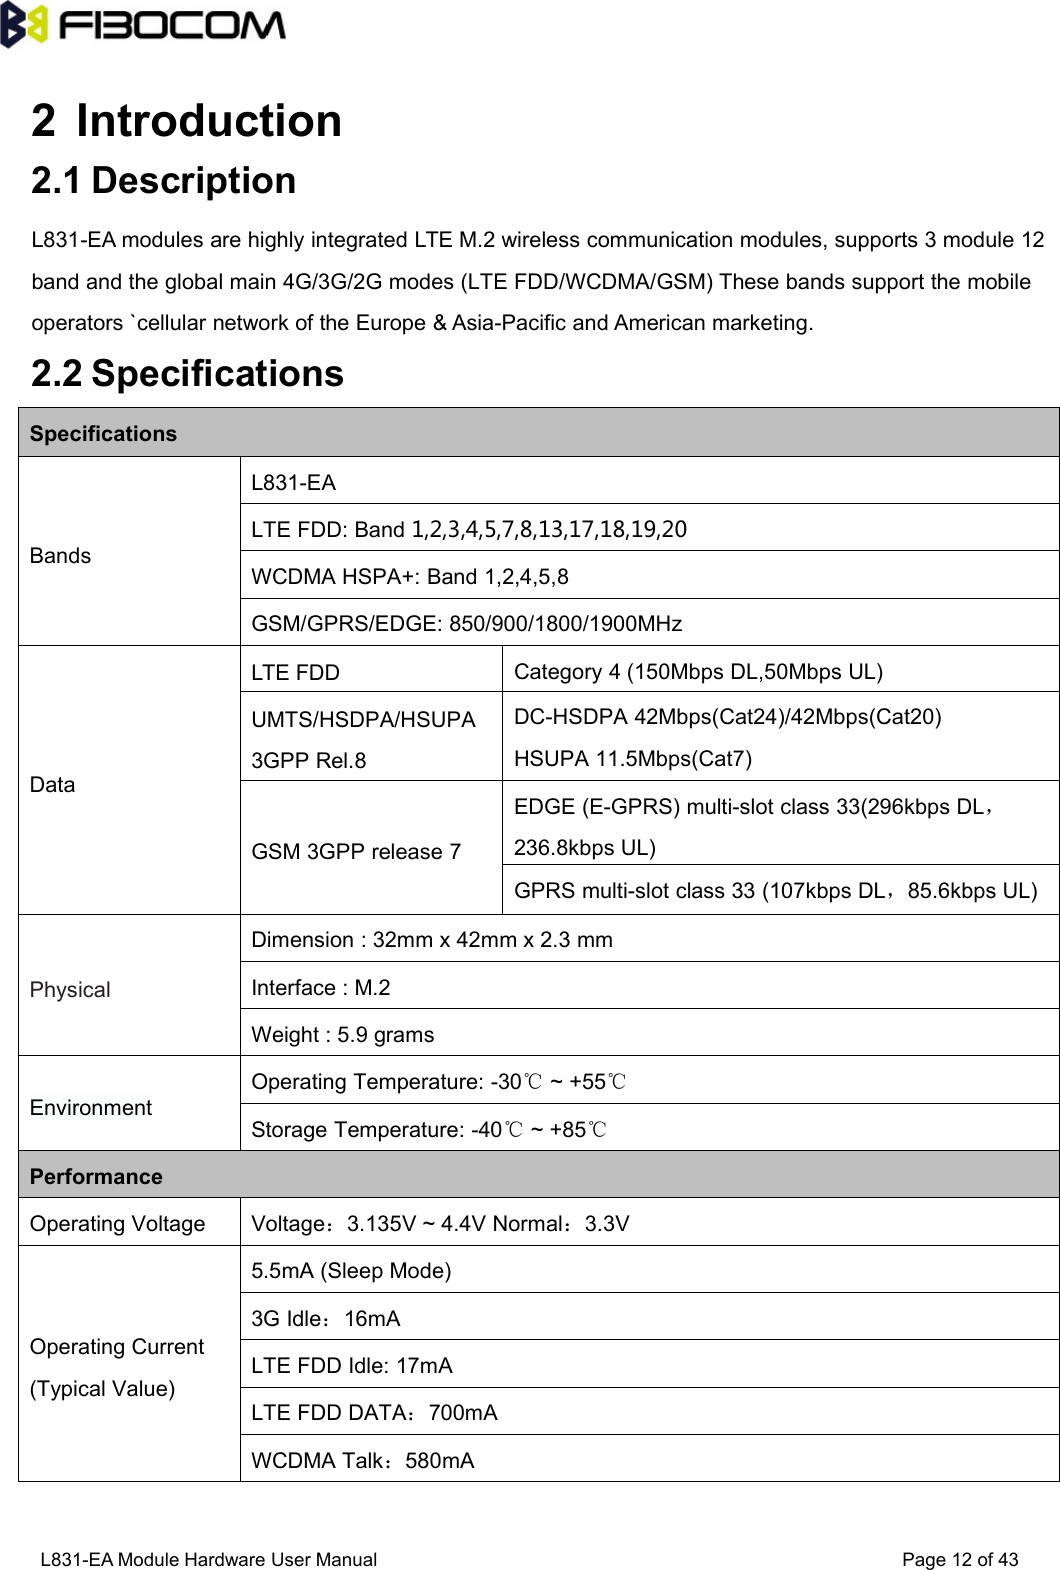 L831-EA Module Hardware User Manual Page12of432 Introduction2.1 DescriptionL831-EA modules are highly integrated LTE M.2 wireless communication modules, supports 3 module 12band and the global main 4G/3G/2G modes (LTE FDD/WCDMA/GSM) These bands support the mobileoperators `cellular network of the Europe &amp; Asia-Pacific and American marketing.2.2 SpecificationsSpecificationsBandsL831-EALTE FDD: Band 1,2,3,4,5,7,8,13,17,18,19,20WCDMA HSPA+: Band 1,2,4,5,8GSM/GPRS/EDGE: 850/900/1800/1900MHzDataLTE FDDCategory 4 (150Mbps DL,50Mbps UL)UMTS/HSDPA/HSUPA3GPP Rel.8DC-HSDPA 42Mbps(Cat24)/42Mbps(Cat20)HSUPA 11.5Mbps(Cat7)GSM 3GPP release 7EDGE (E-GPRS) multi-slot class 33(296kbps DL，236.8kbps UL)GPRS multi-slot class 33 (107kbps DL，85.6kbps UL)PhysicalDimension : 32mm x 42mm x 2.3 mmInterface : M.2Weight : 5.9 gramsEnvironmentOperating Temperature: -30℃~ +55℃Storage Temperature: -40℃~ +85℃PerformanceOperating VoltageVoltage：3.135V ~ 4.4V Normal：3.3VOperating Current(Typical Value)5.5mA (Sleep Mode)3G Idle：16mALTE FDD Idle: 17mALTE FDD DATA：700mAWCDMA Talk：580mA